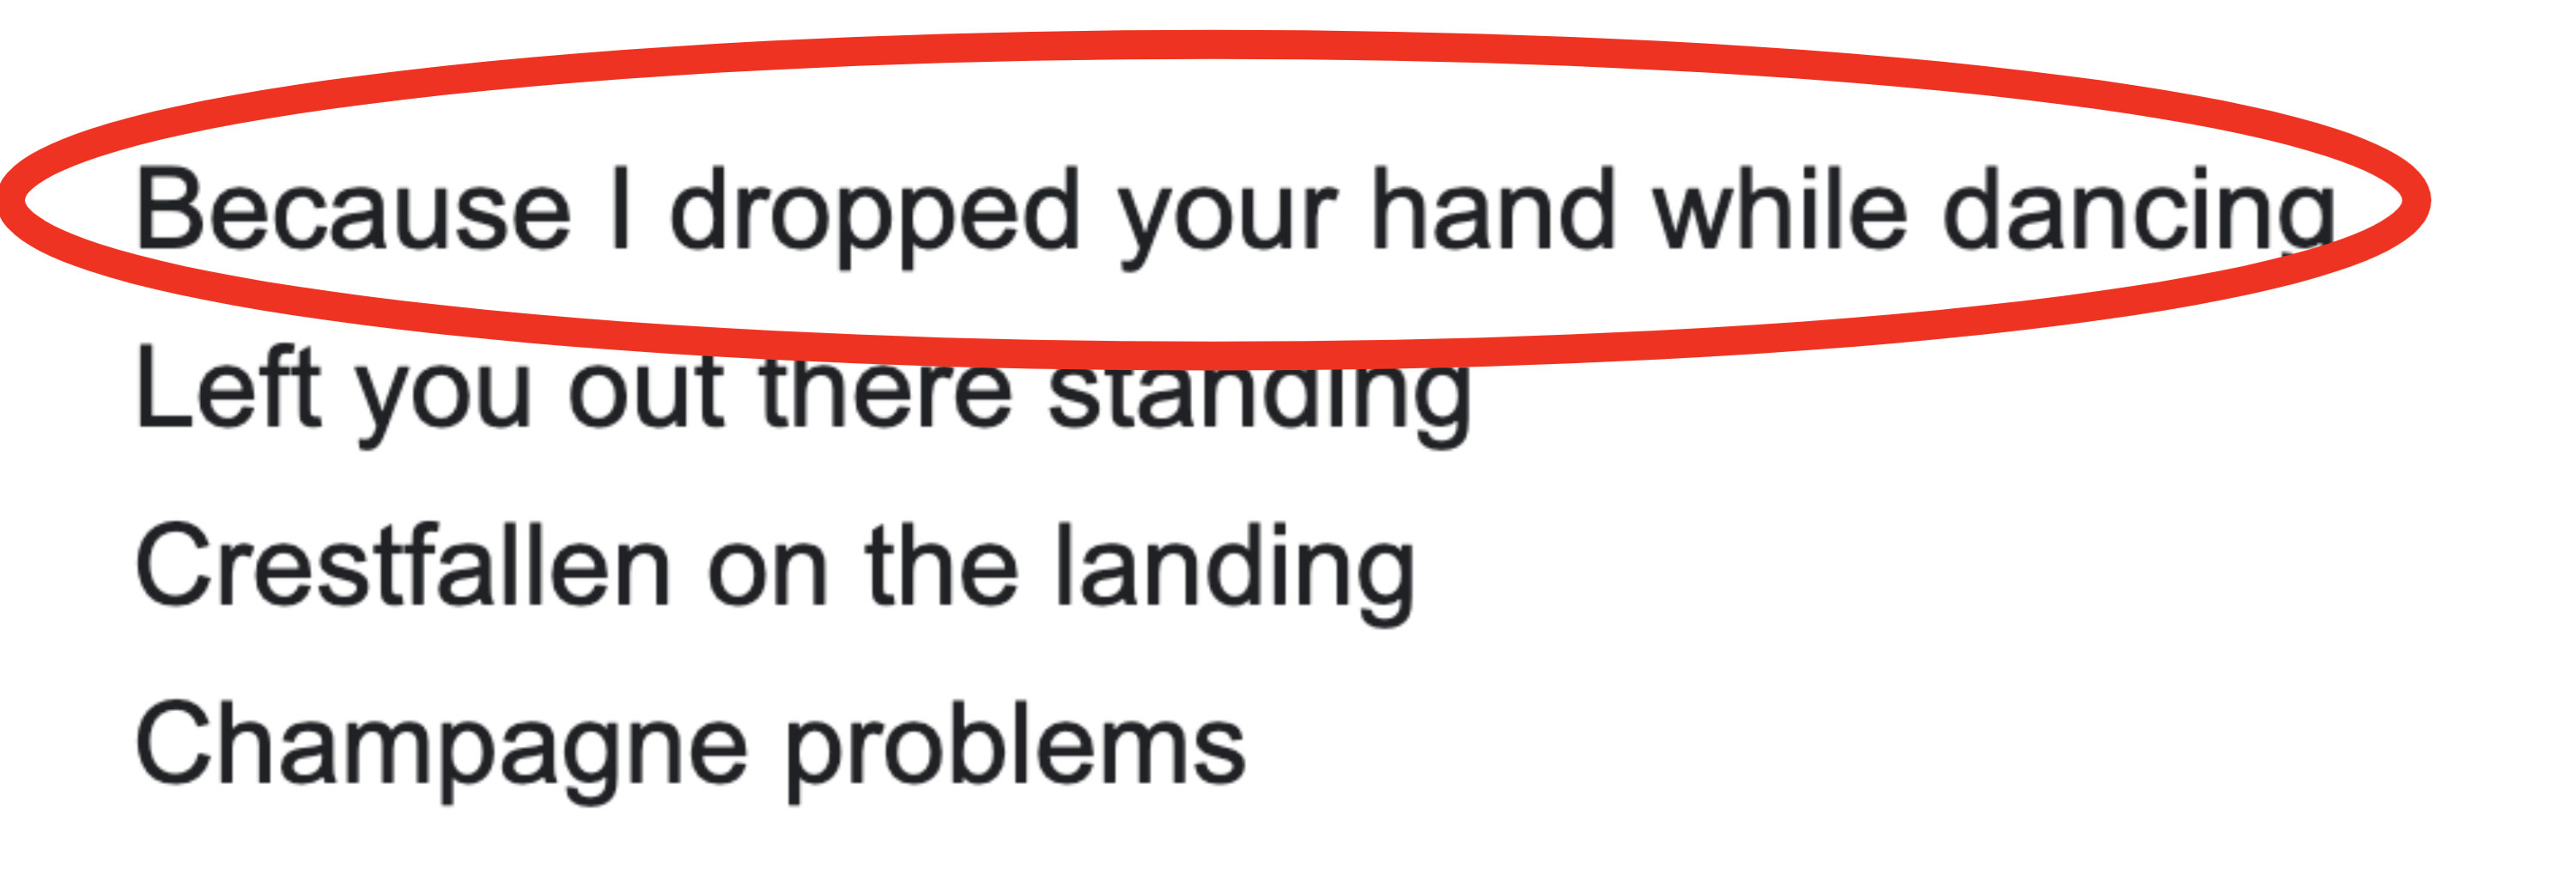 Circled lyric: Because I dropped your hand while dancing